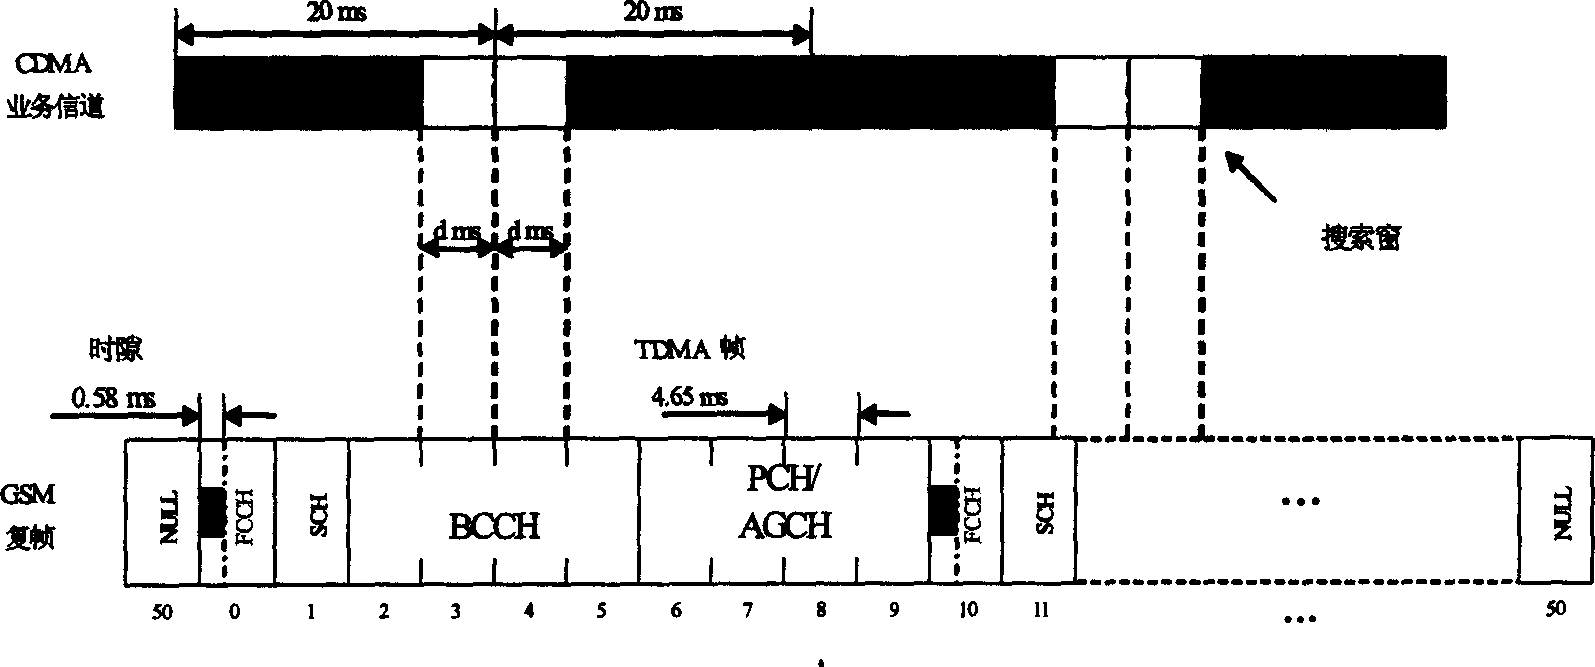 Timing method for searching GSM frequency correcting channel in CDMA 2000 system